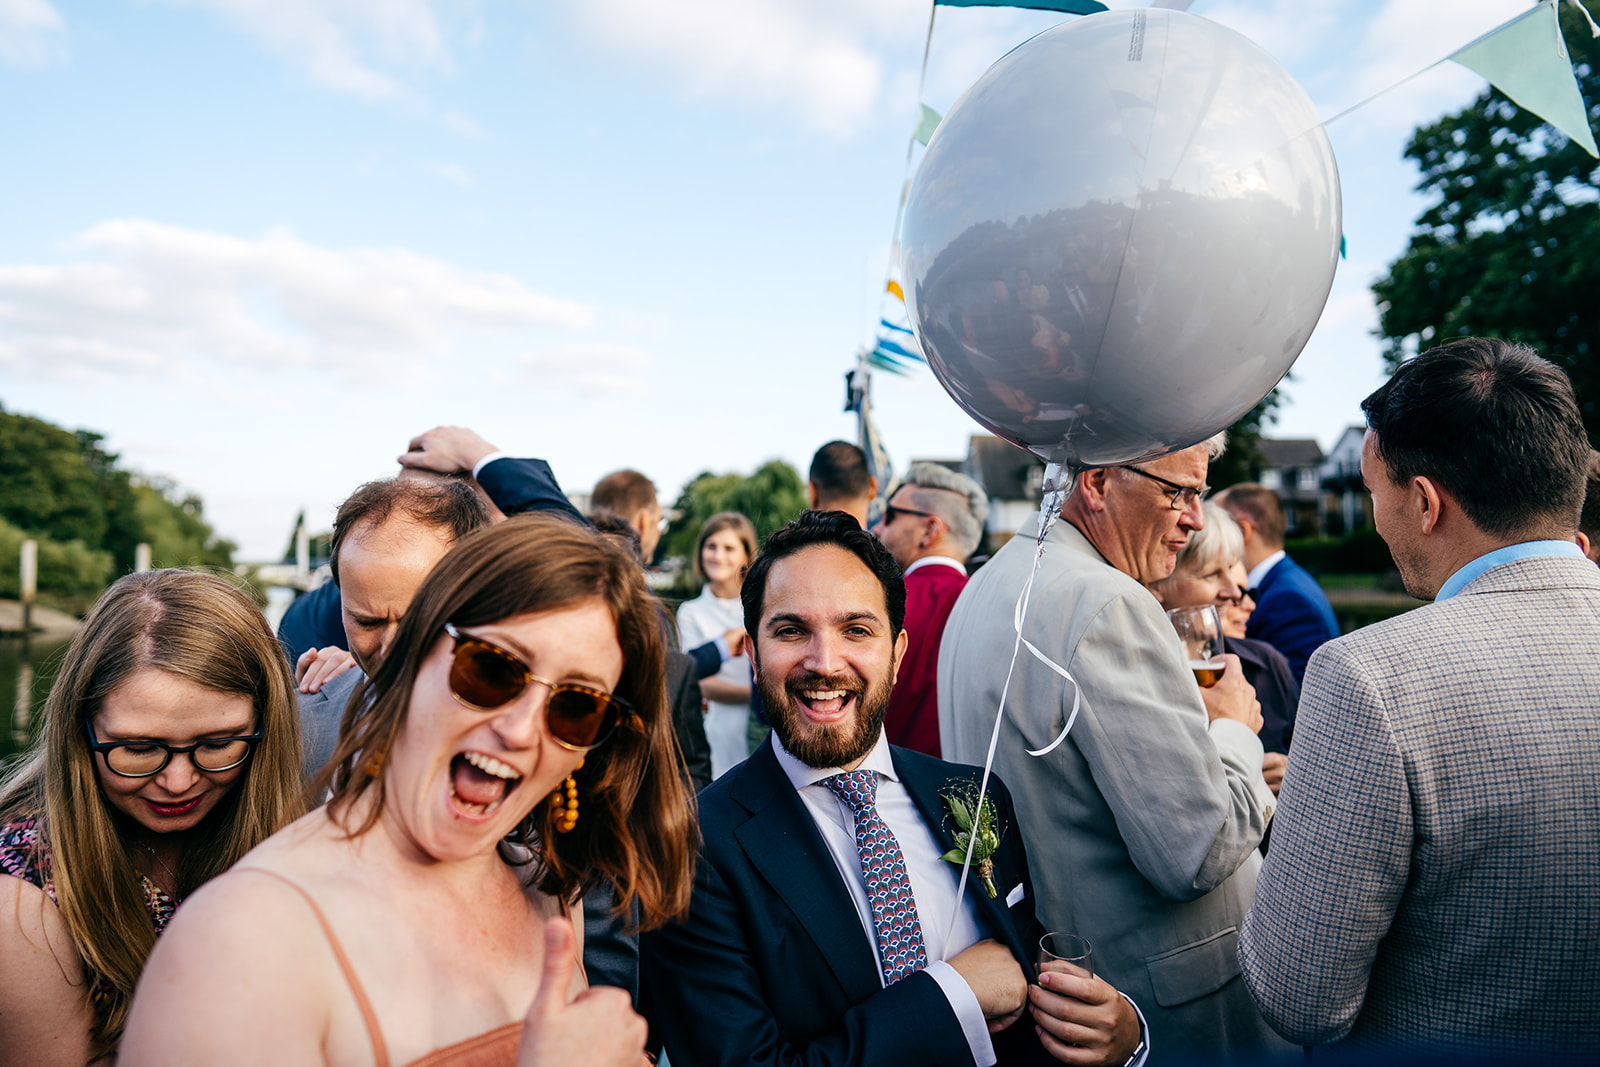 Candid London wedding photography for fun loving and chilled out people